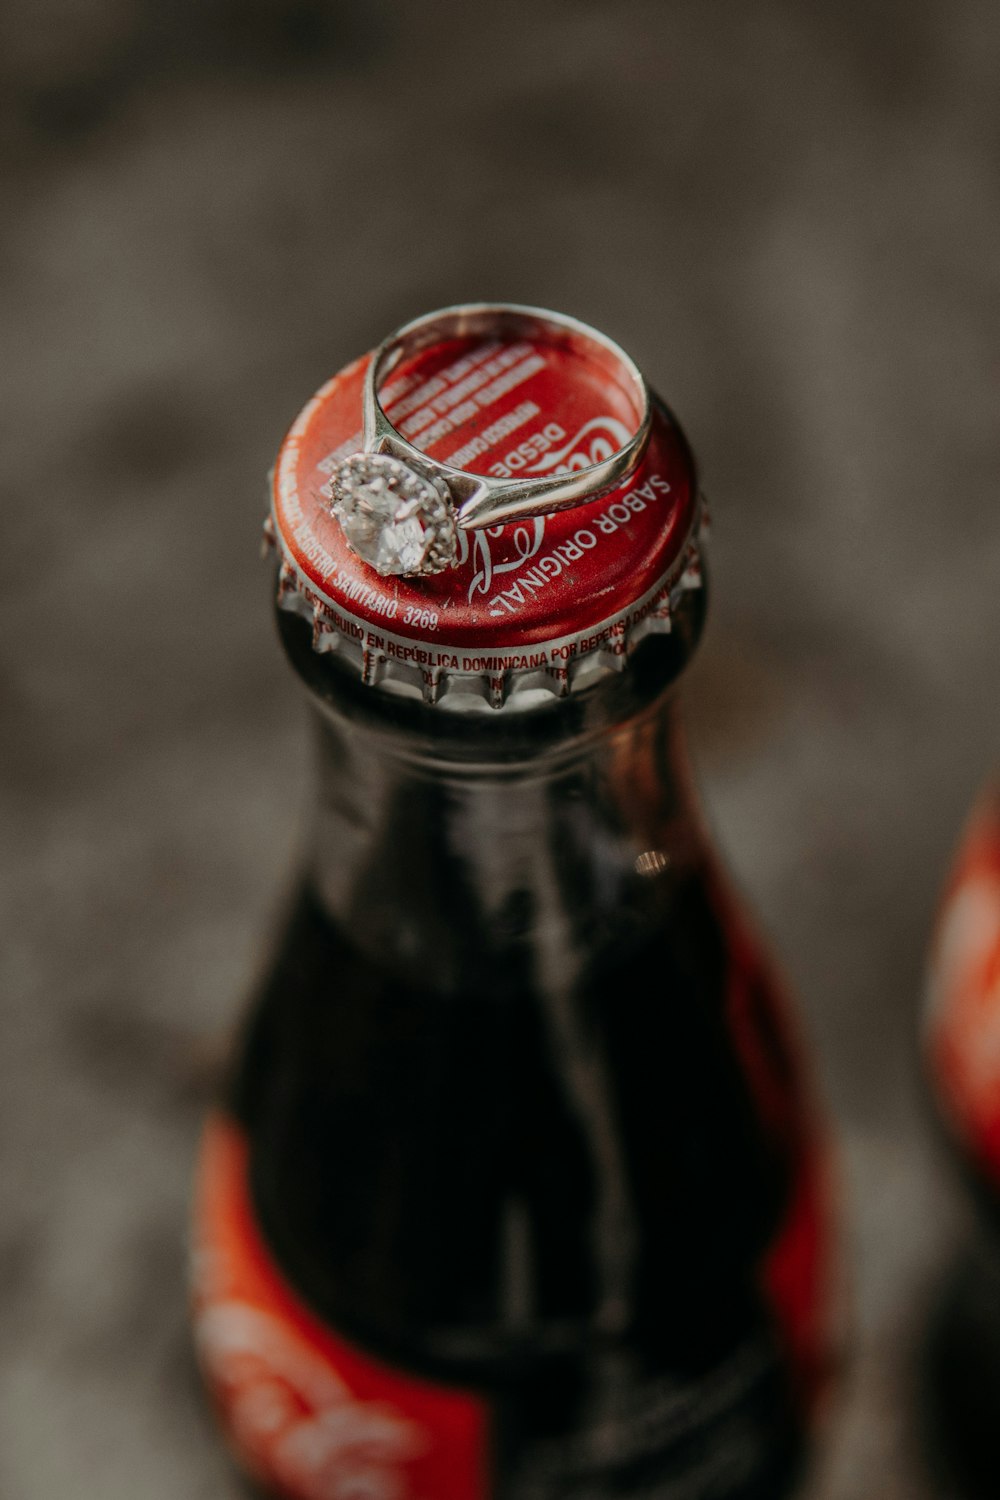 coca cola bottle in close up photography